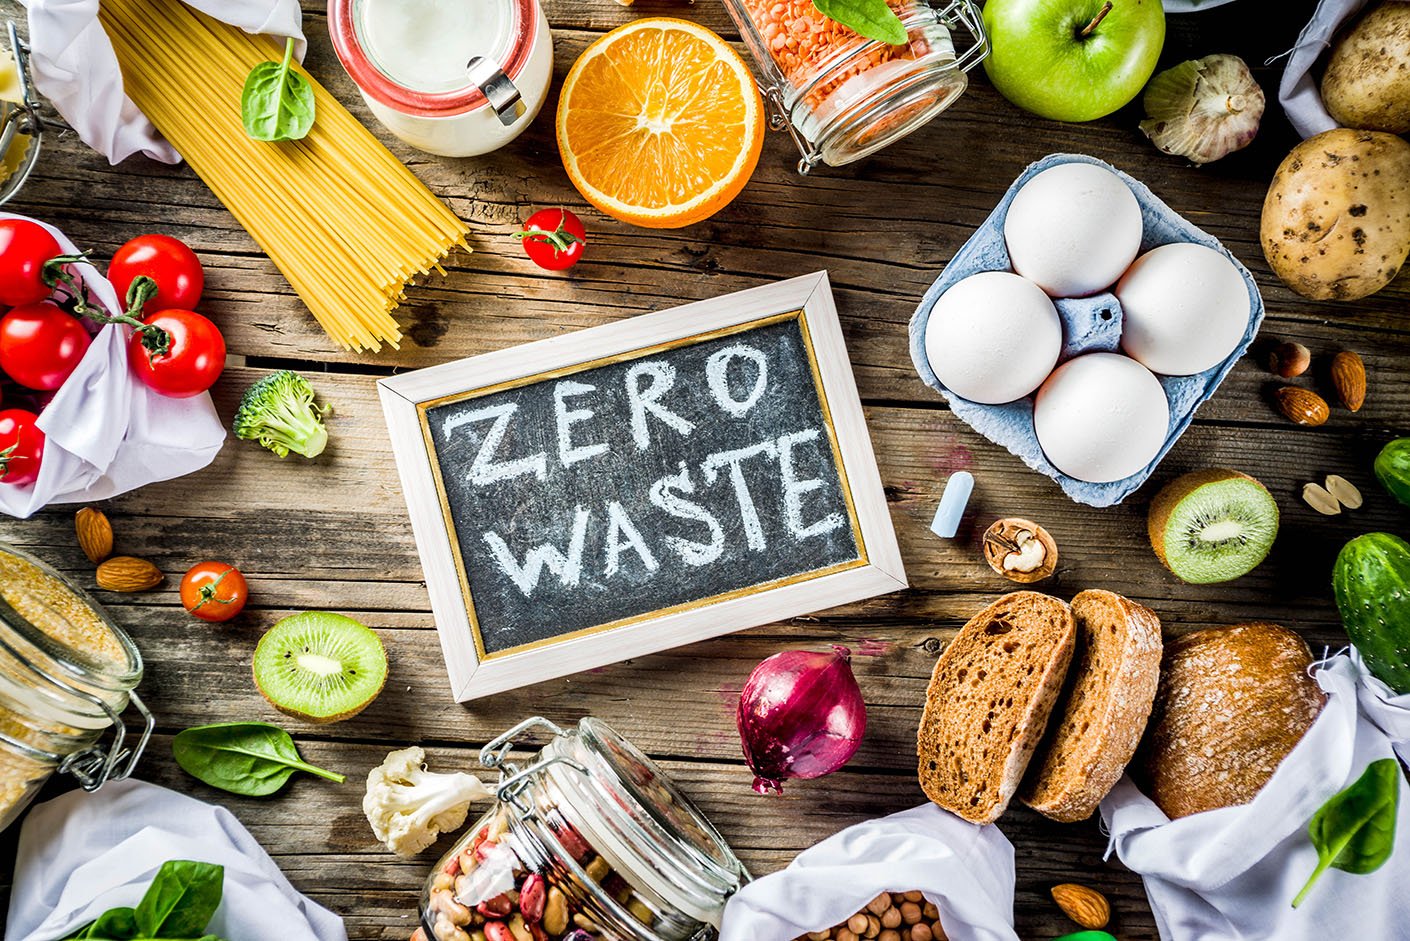 Stop Waste, Save Food: 10 Easy Ways for Restaurants